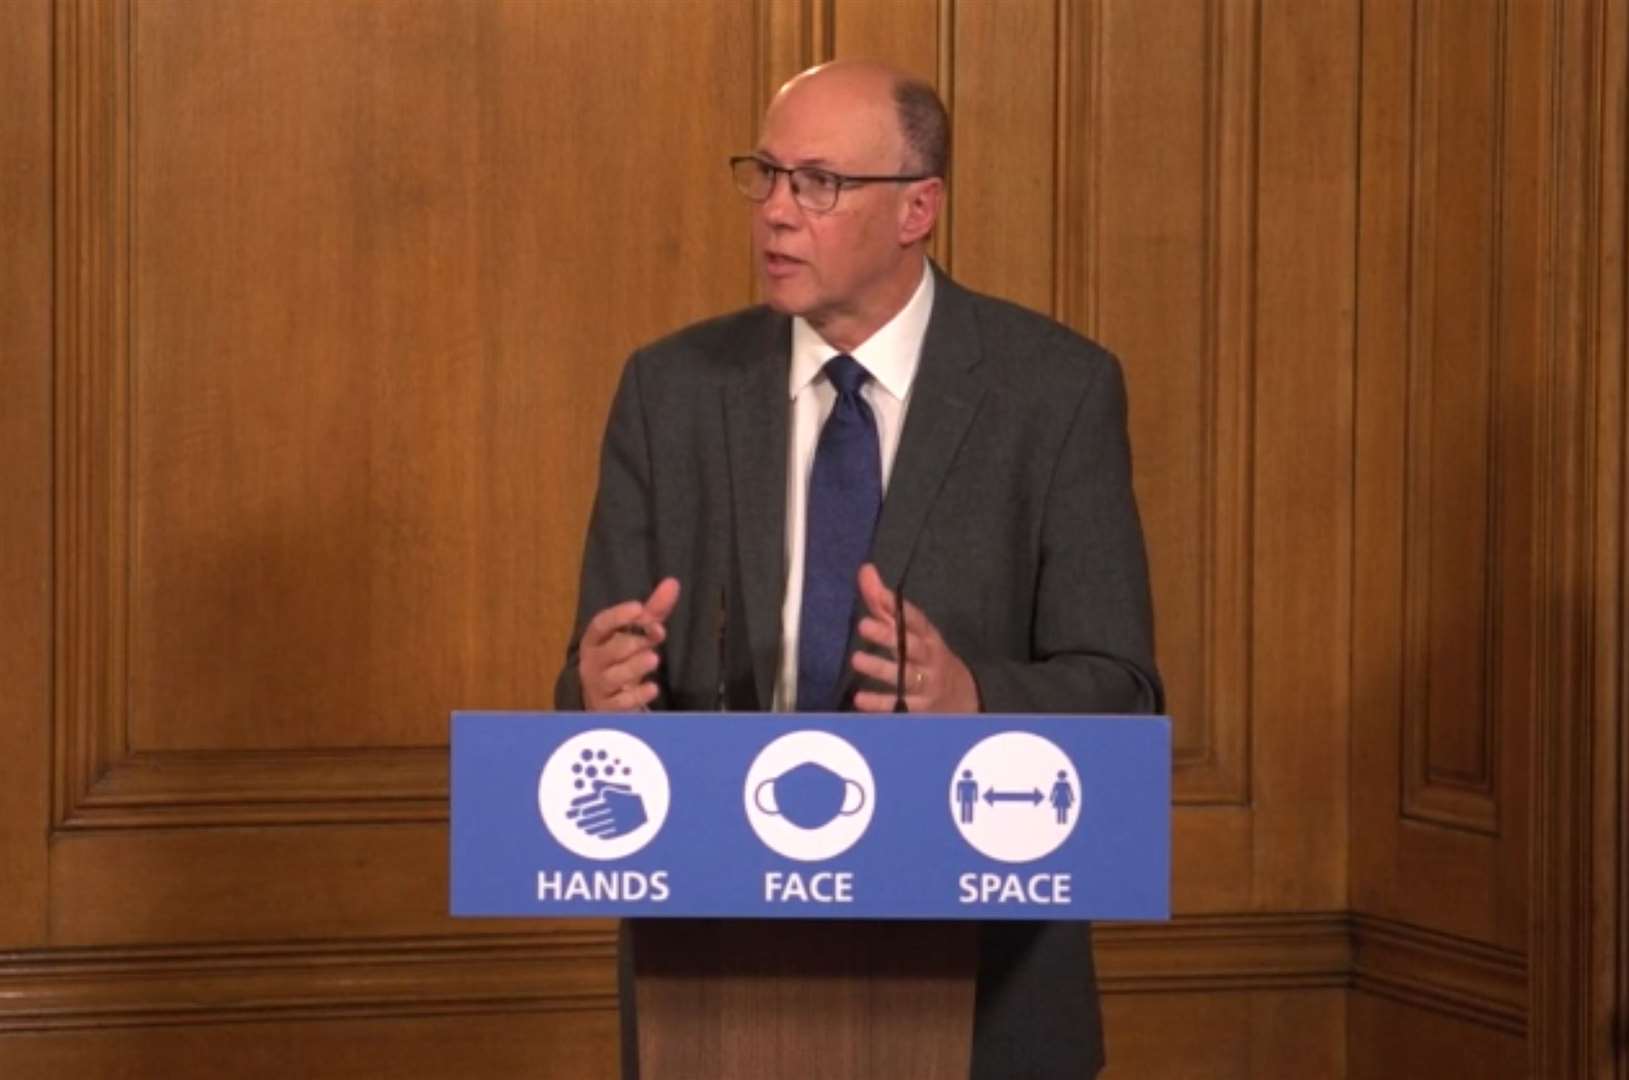 Professor Stephen Powis during a media briefing in Downing Street (PA Video)